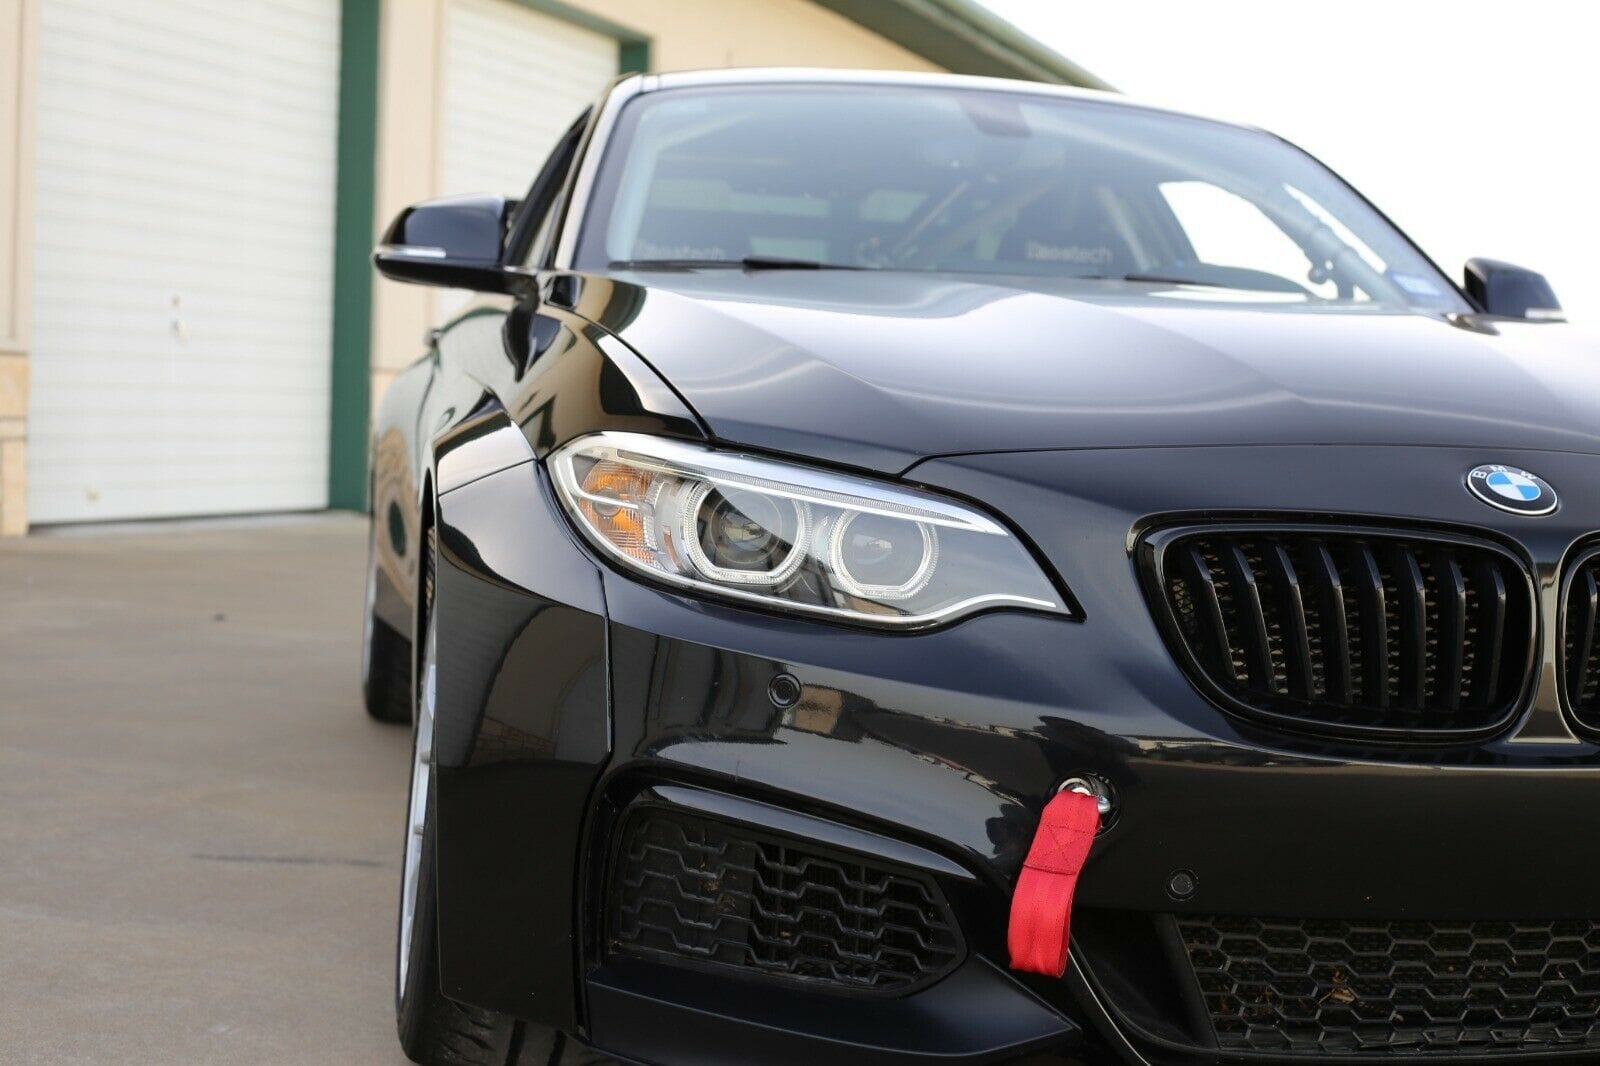 2017 BMW M240i - 2017 BMW M240i Race/Track/Street Build - Used - VIN WBA2G1C31HV639600 - 18,000 Miles - 6 cyl - 2WD - Automatic - Coupe - Black - Fort Worth, TX 76133, United States